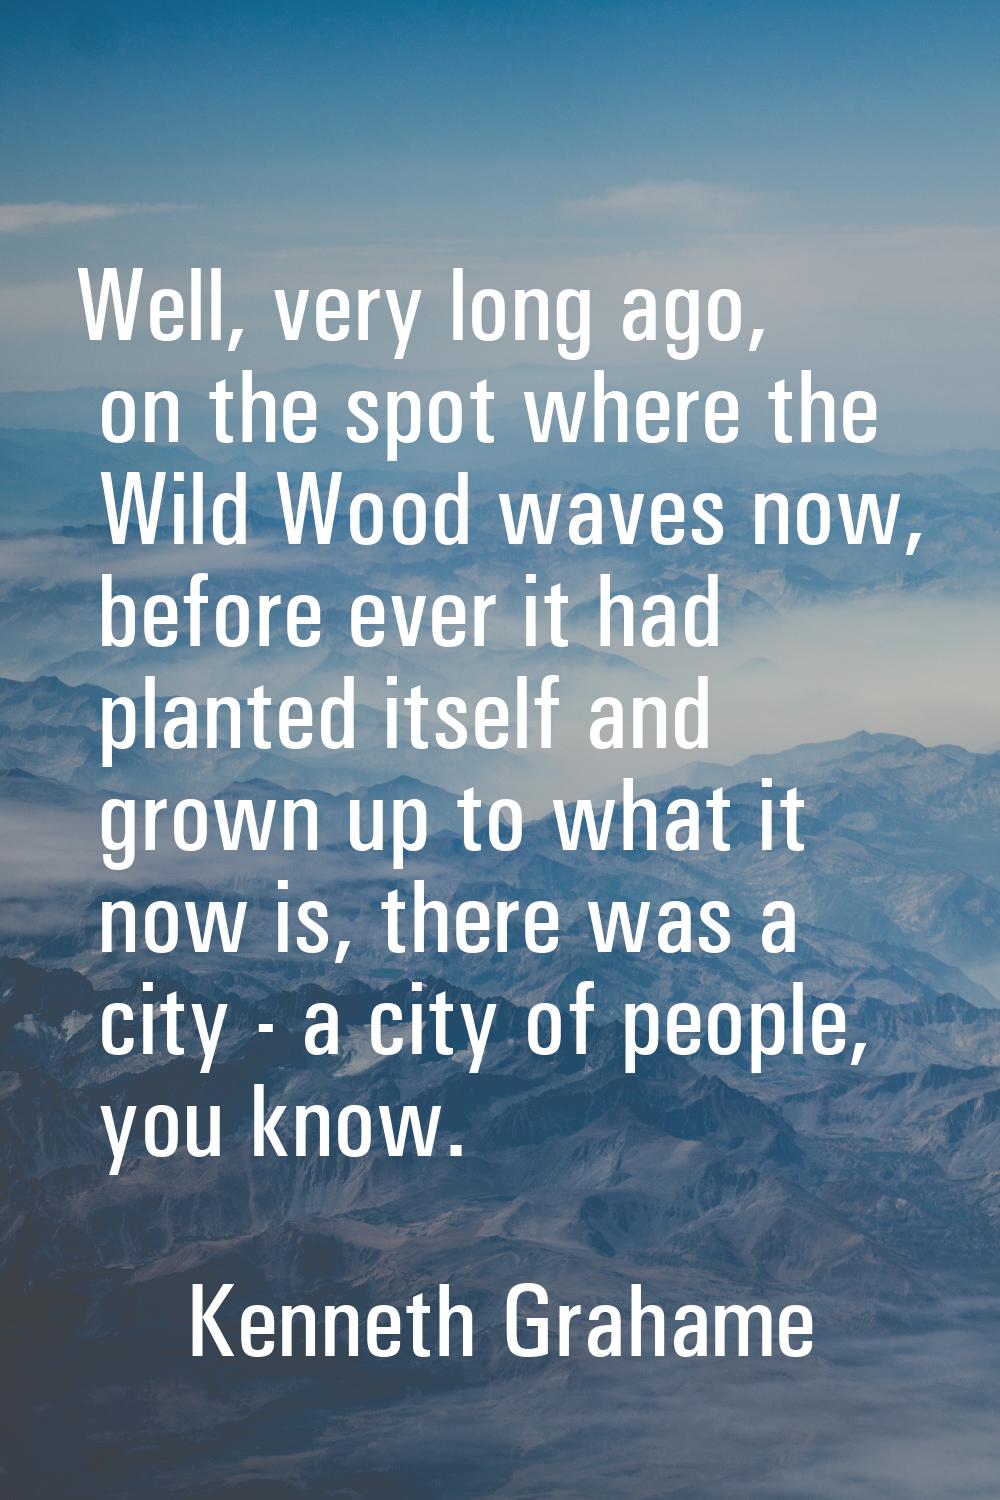 Well, very long ago, on the spot where the Wild Wood waves now, before ever it had planted itself a